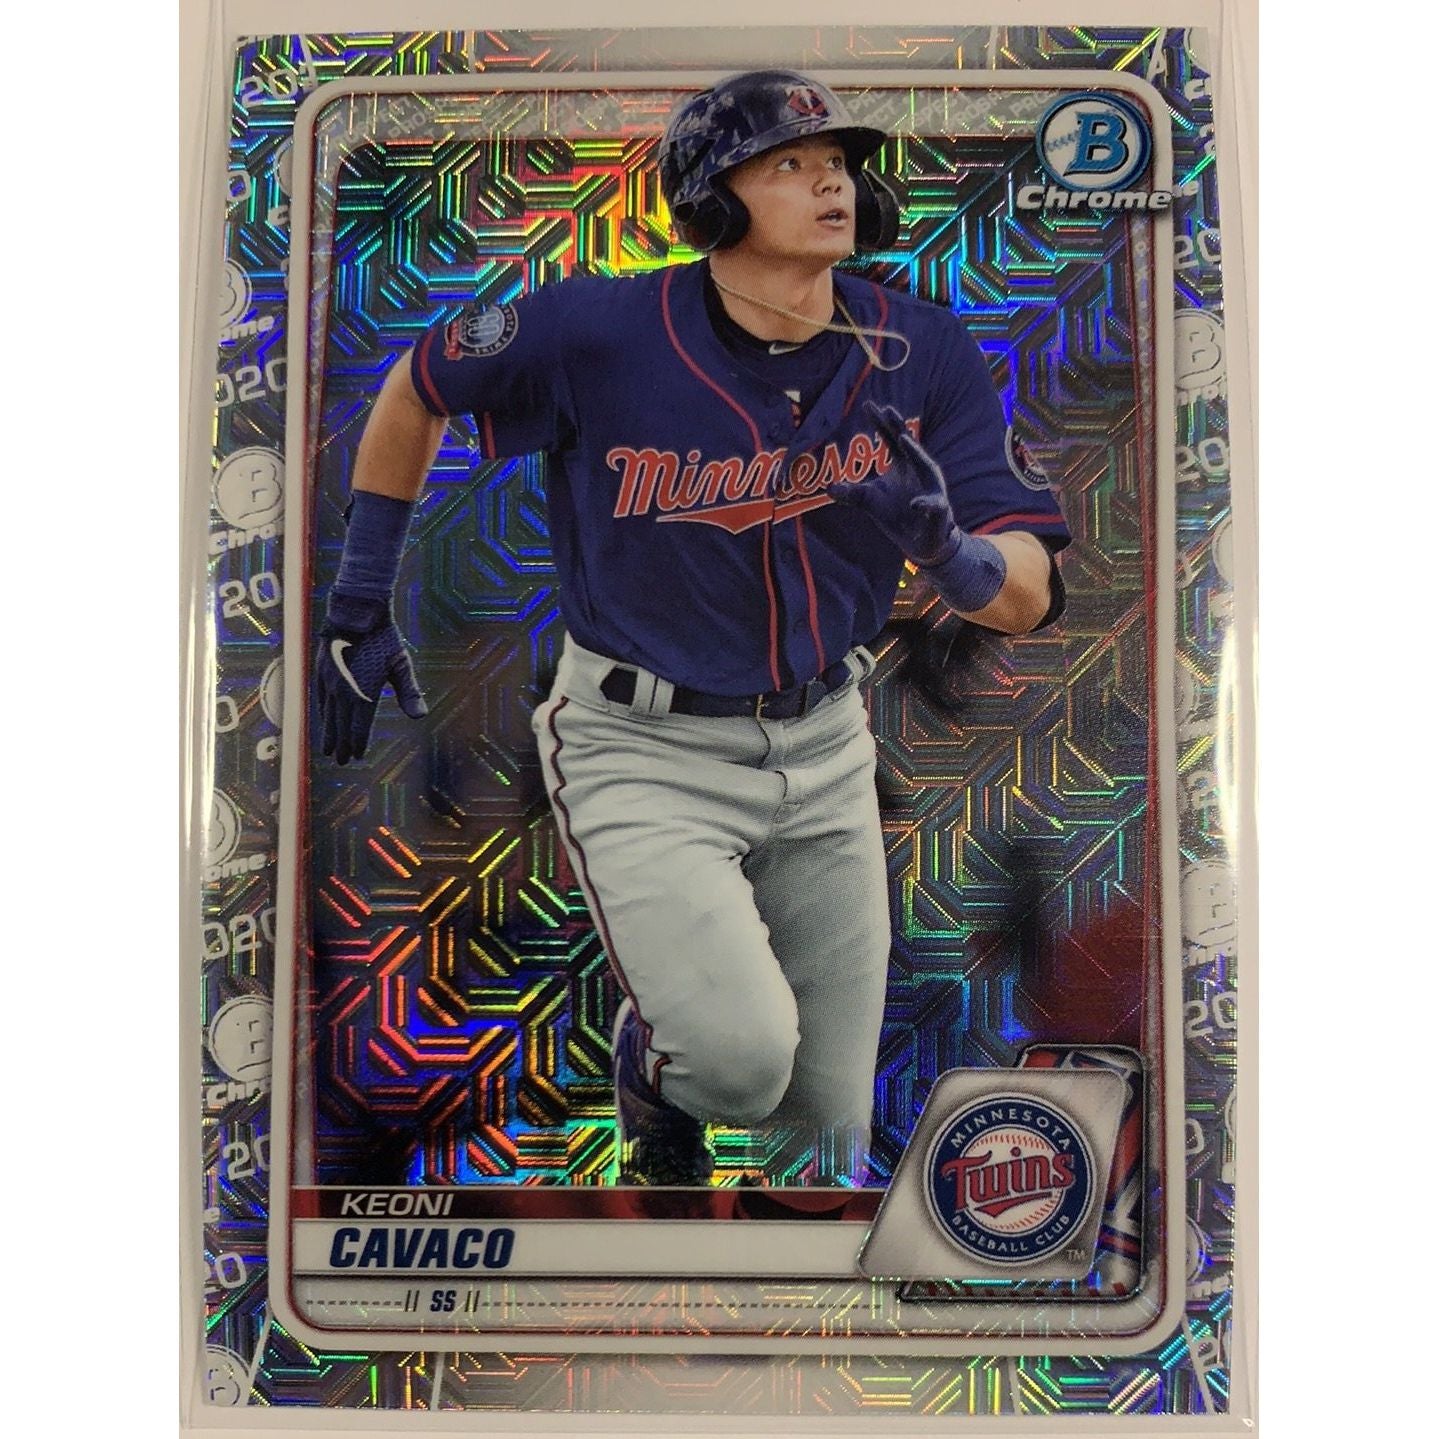  2020 Bowman Chrome Keoni Cavaco Mojo Refractor  Local Legends Cards & Collectibles